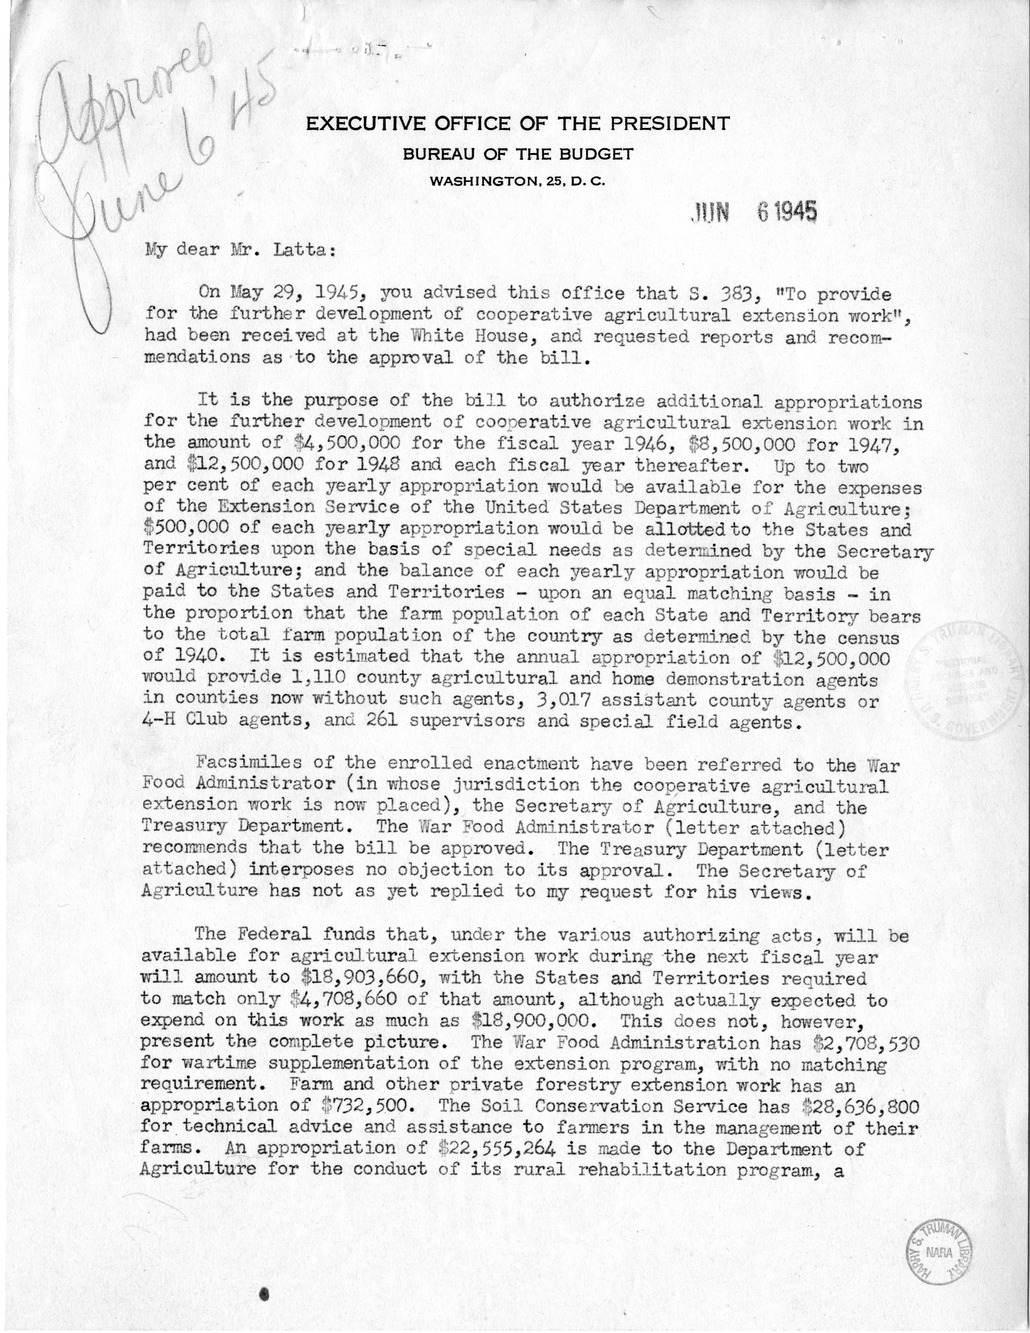 Memorandum from Harold D. Smith to M. C. Latta, S. 383, To Provide for the Further Development of Cooperative Agricultural Extension Work, with Attachments